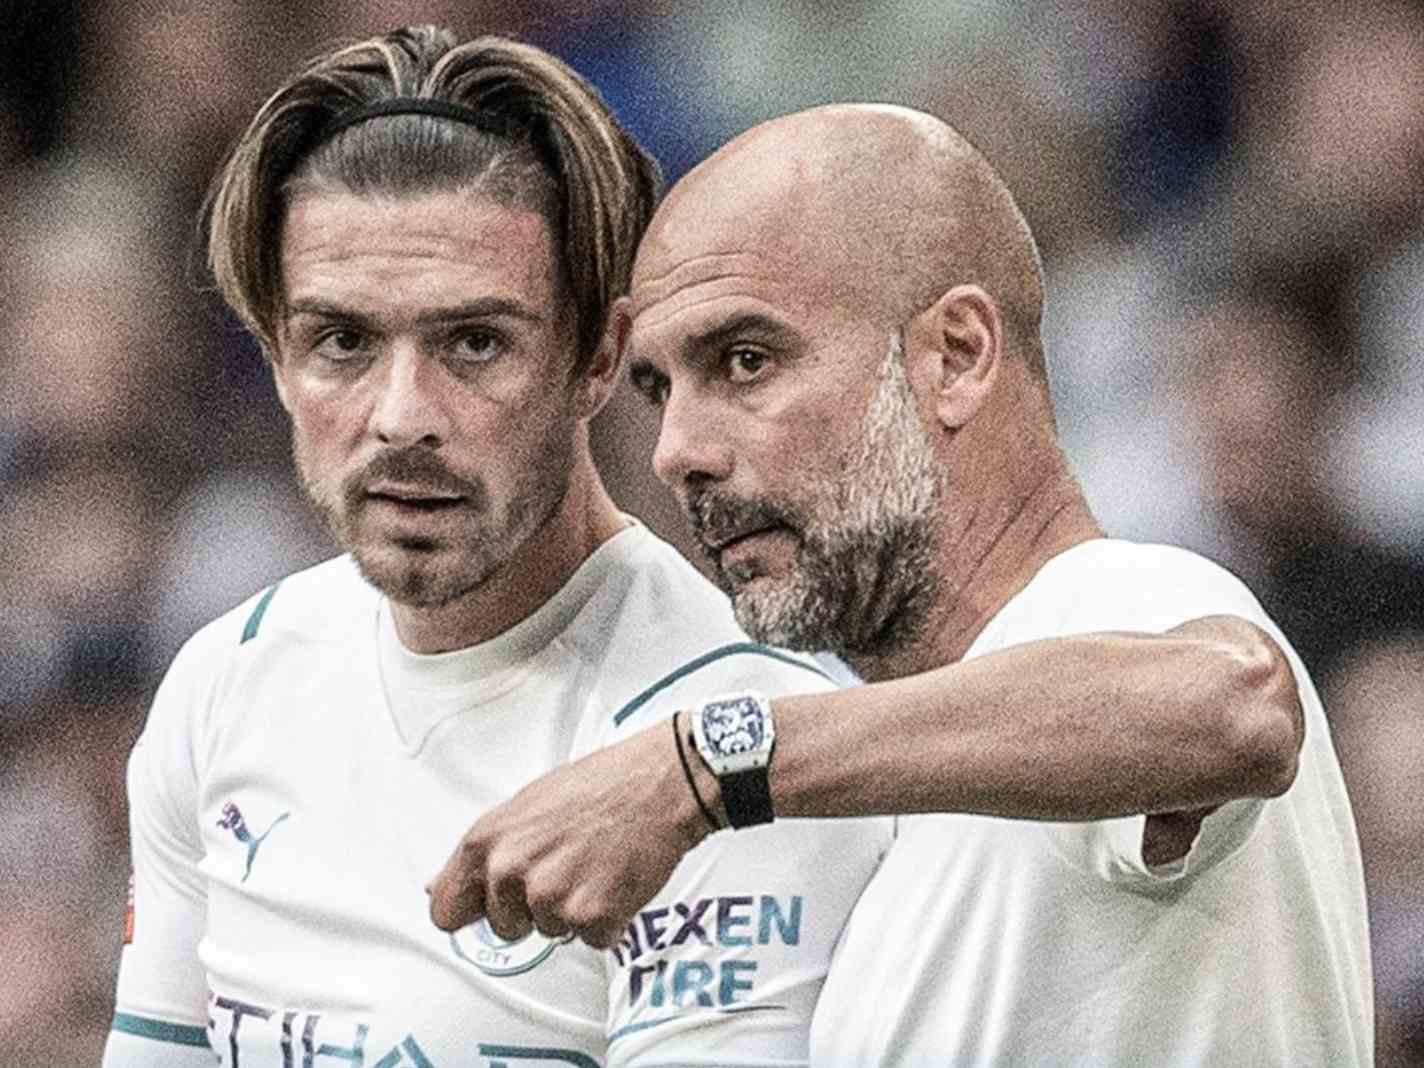 The photo shows Jack Grealish listening to instructions from Pep Guardiola